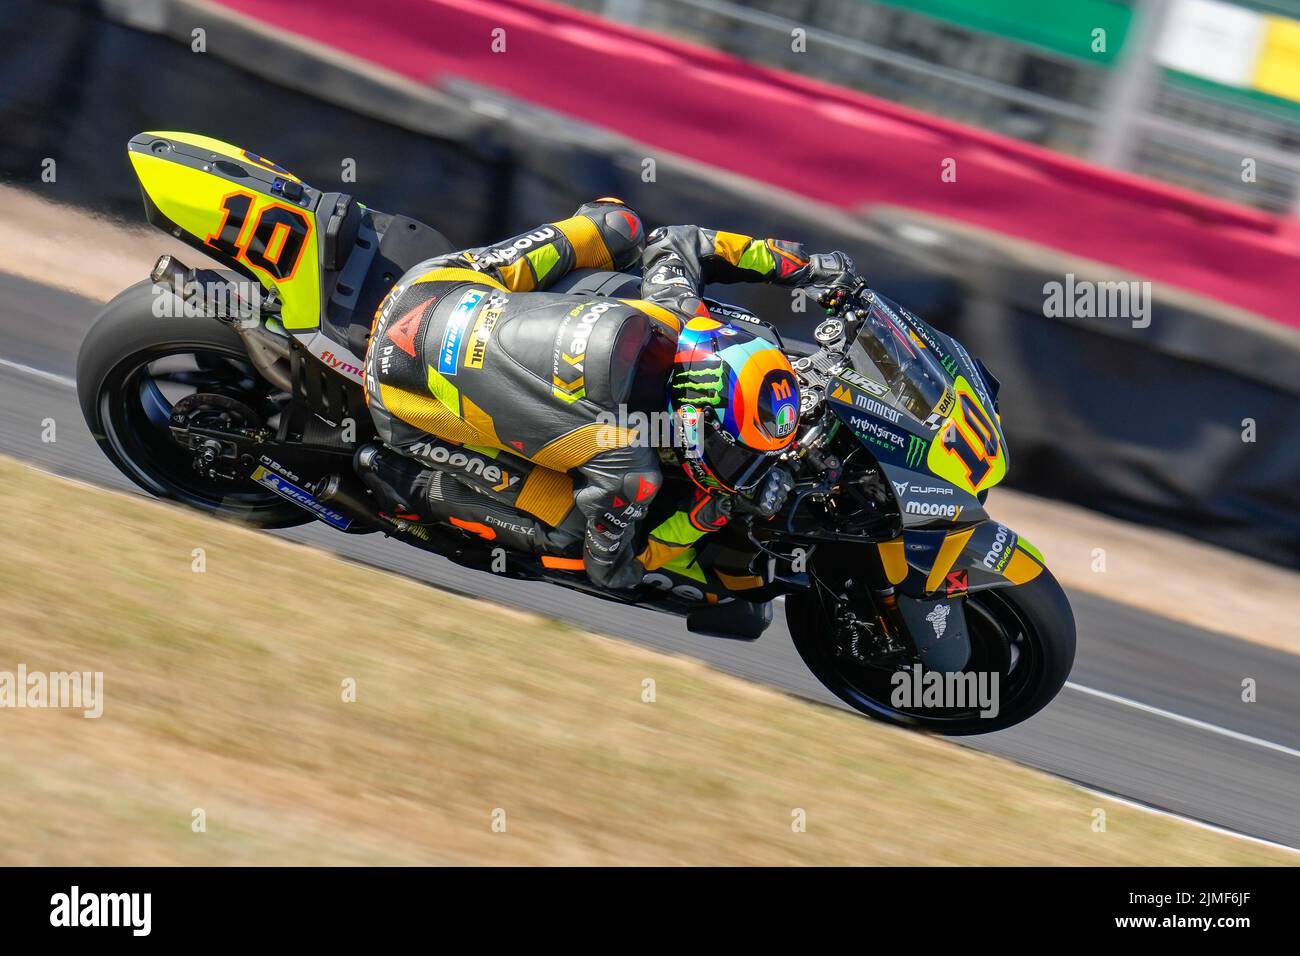 Towcester, UK. 06th Aug, 2022. Luca MARINI (Italy) of the Mooney VR46 Racing Team (Ducati) during the 2022 Monster Energy Grand Prix MotoGP Free Practice 3 session at Silverstone Circuit, Towcester, England on the 6th August 2022. Photo by David Horn. Credit: PRiME Media Images/Alamy Live News Stock Photo